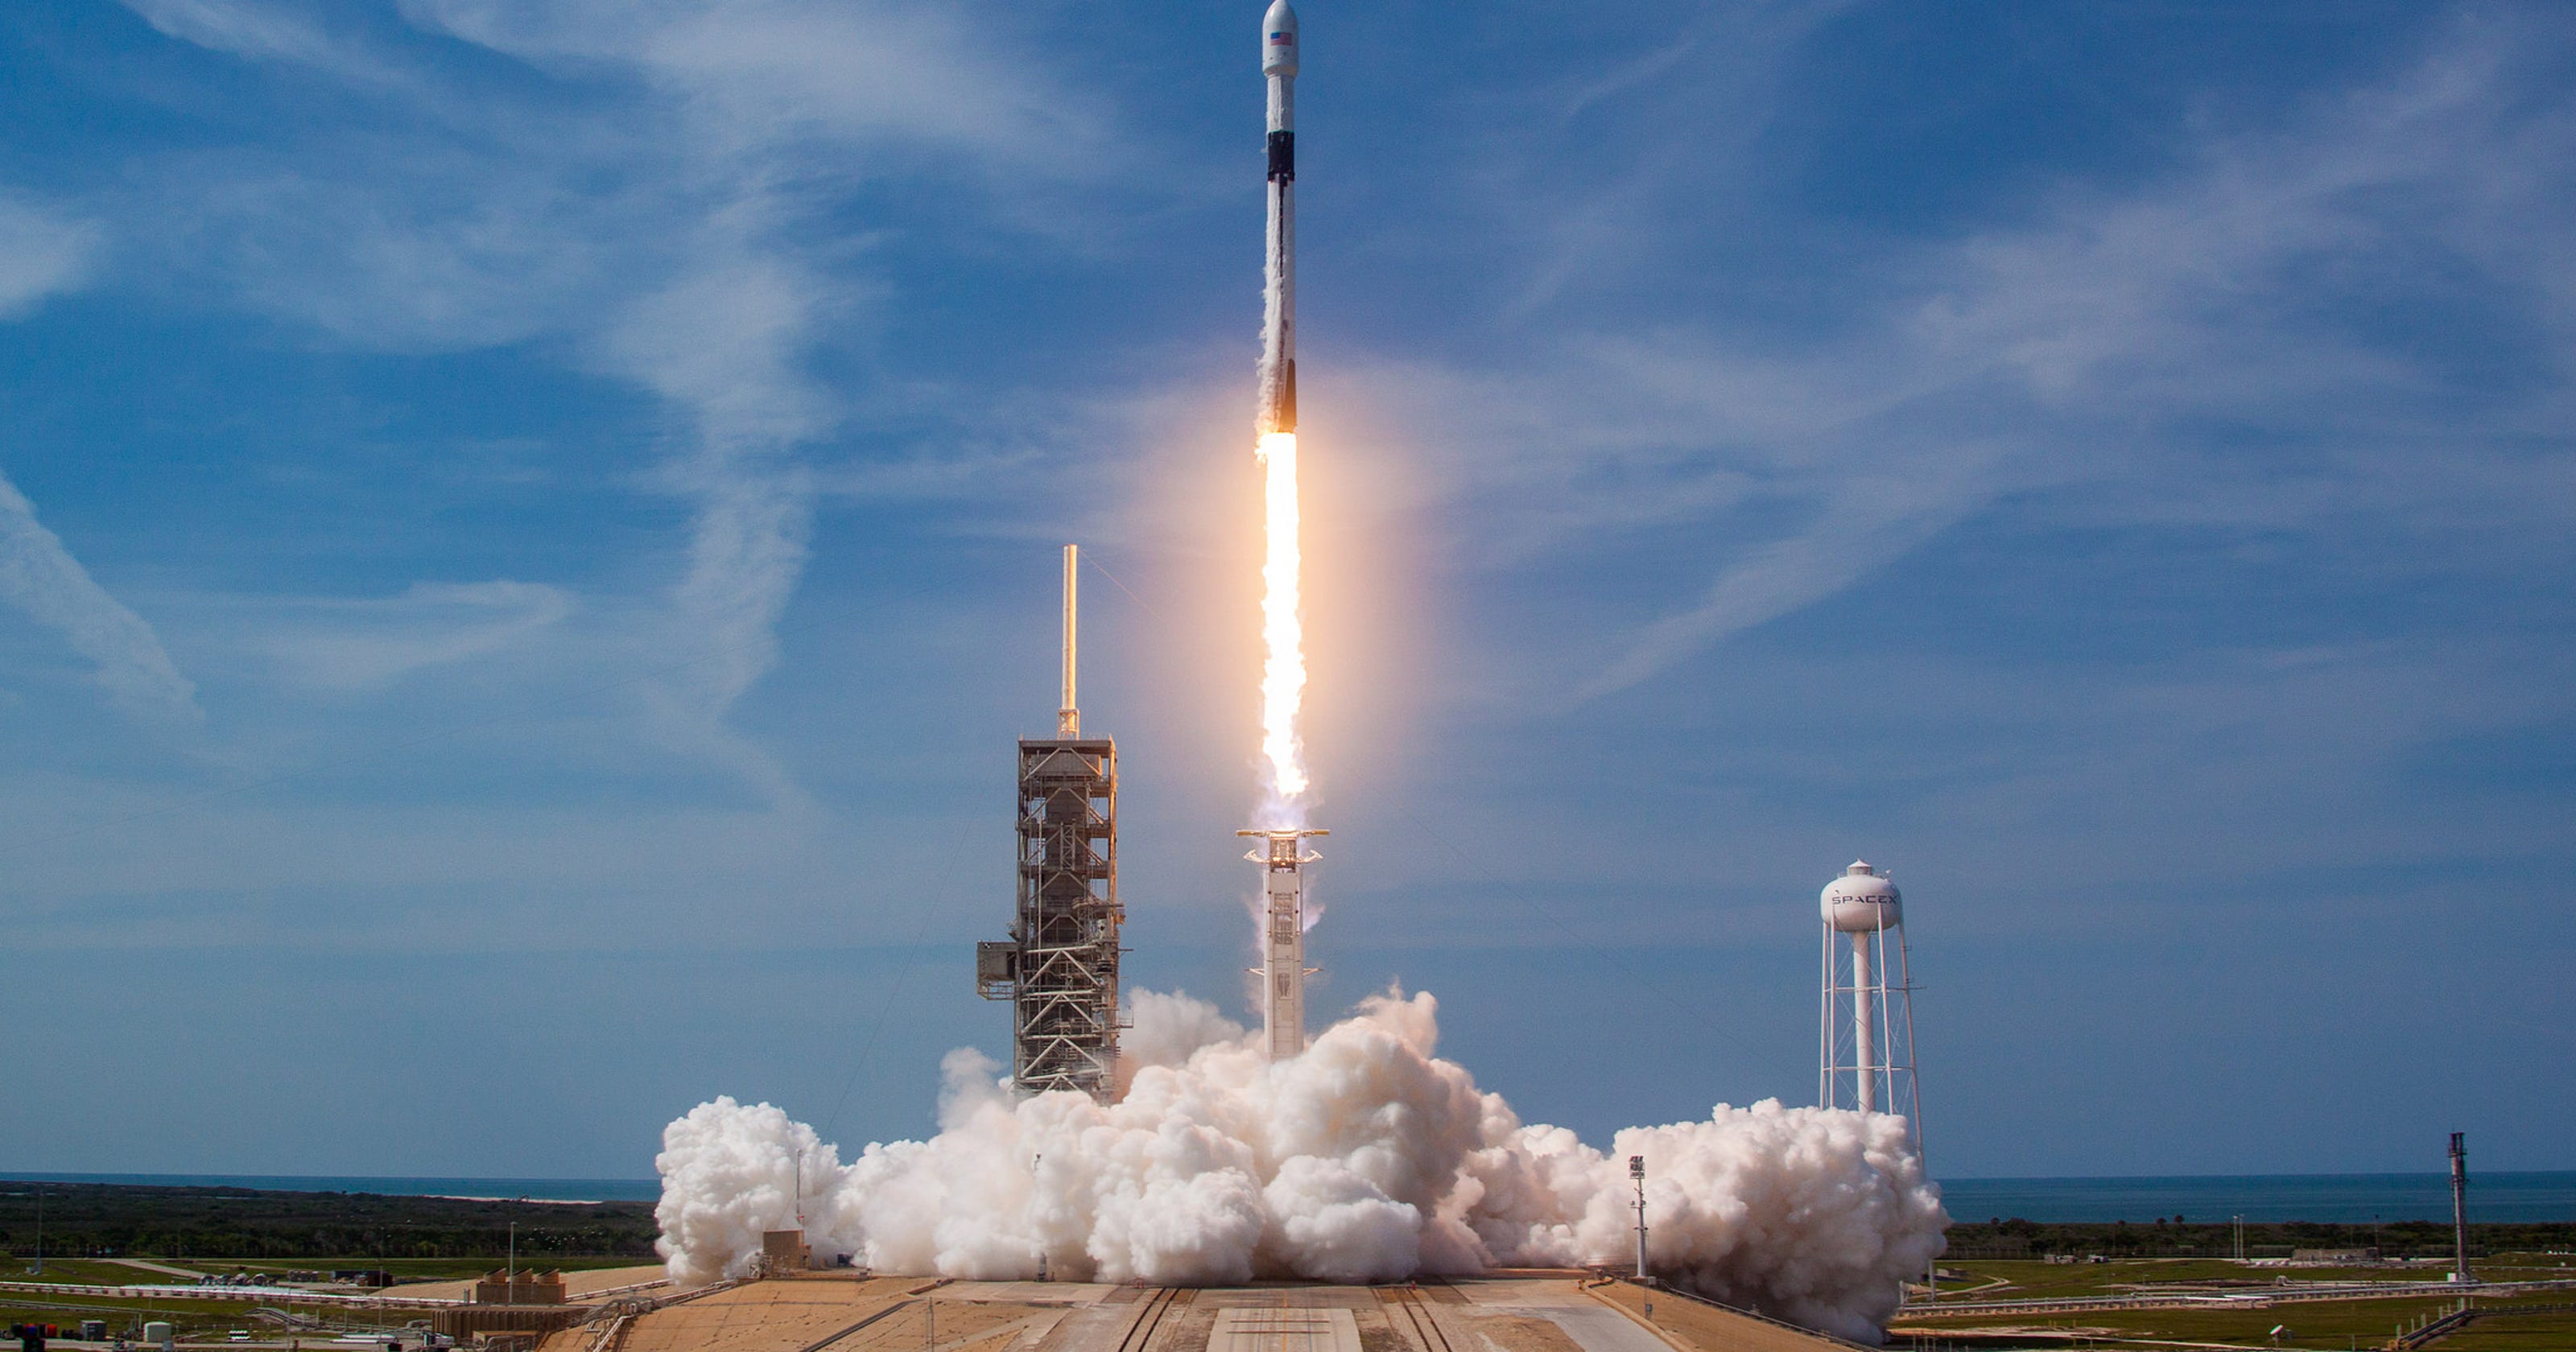 How to watch tonight's SpaceX Falcon 9 launch from Cape Canaveral